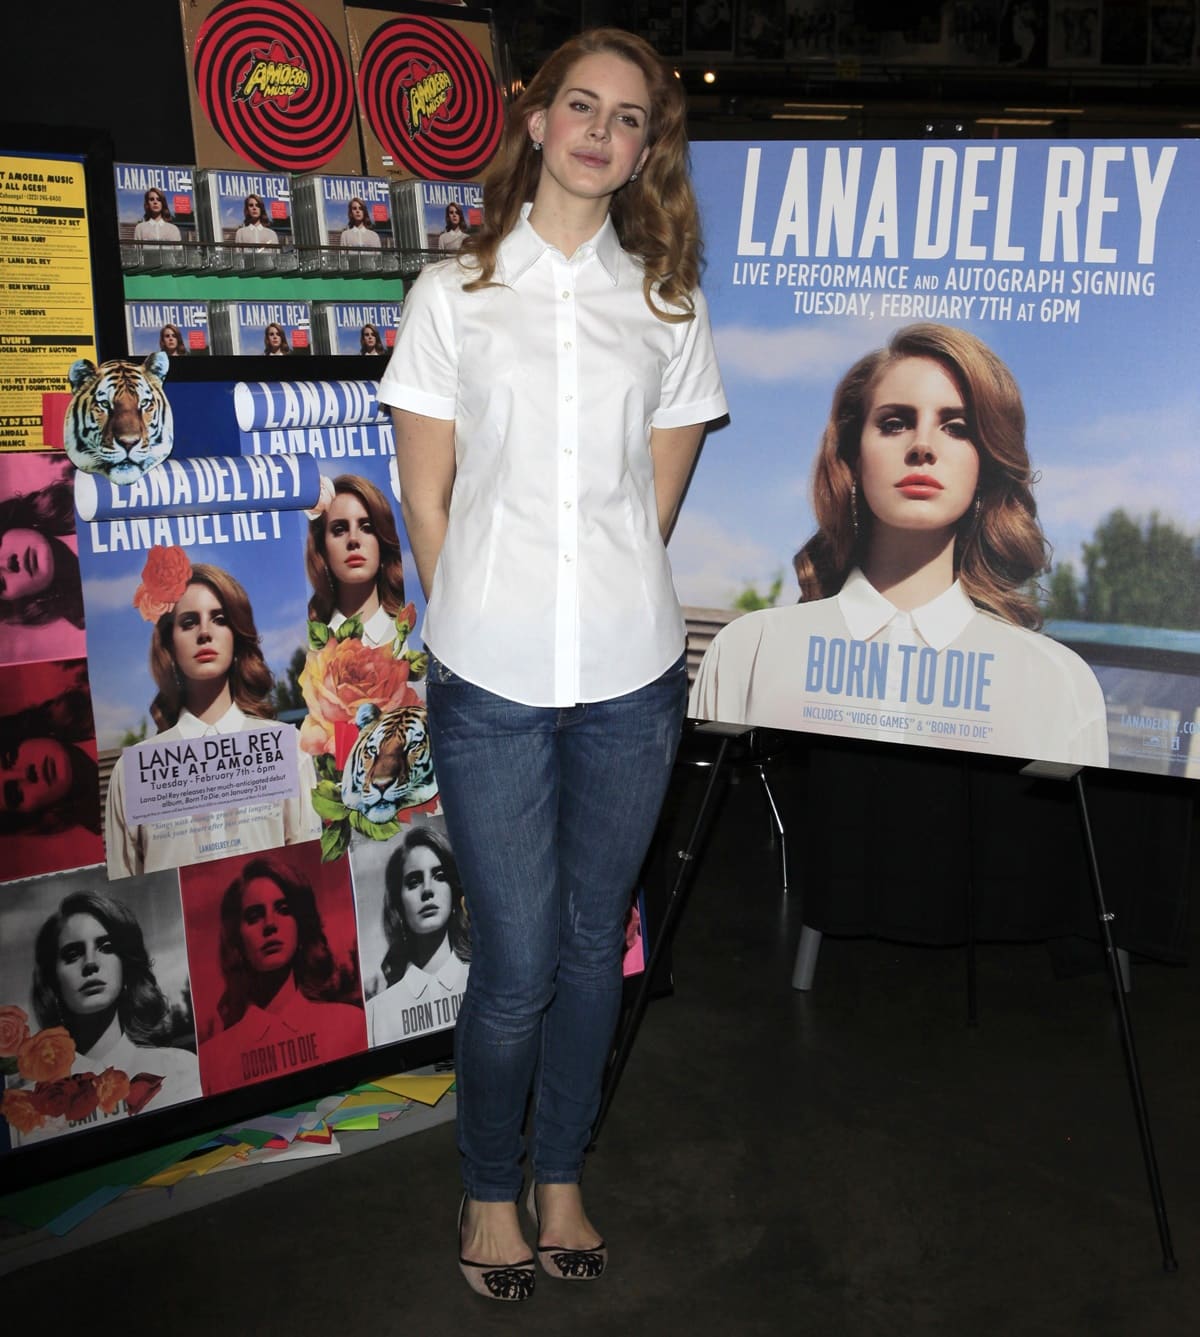 Lana Del Rey performed and did a CD signing at Amoeba Records in Los Angeles on February 7, 2012, to promote her album Born to Die